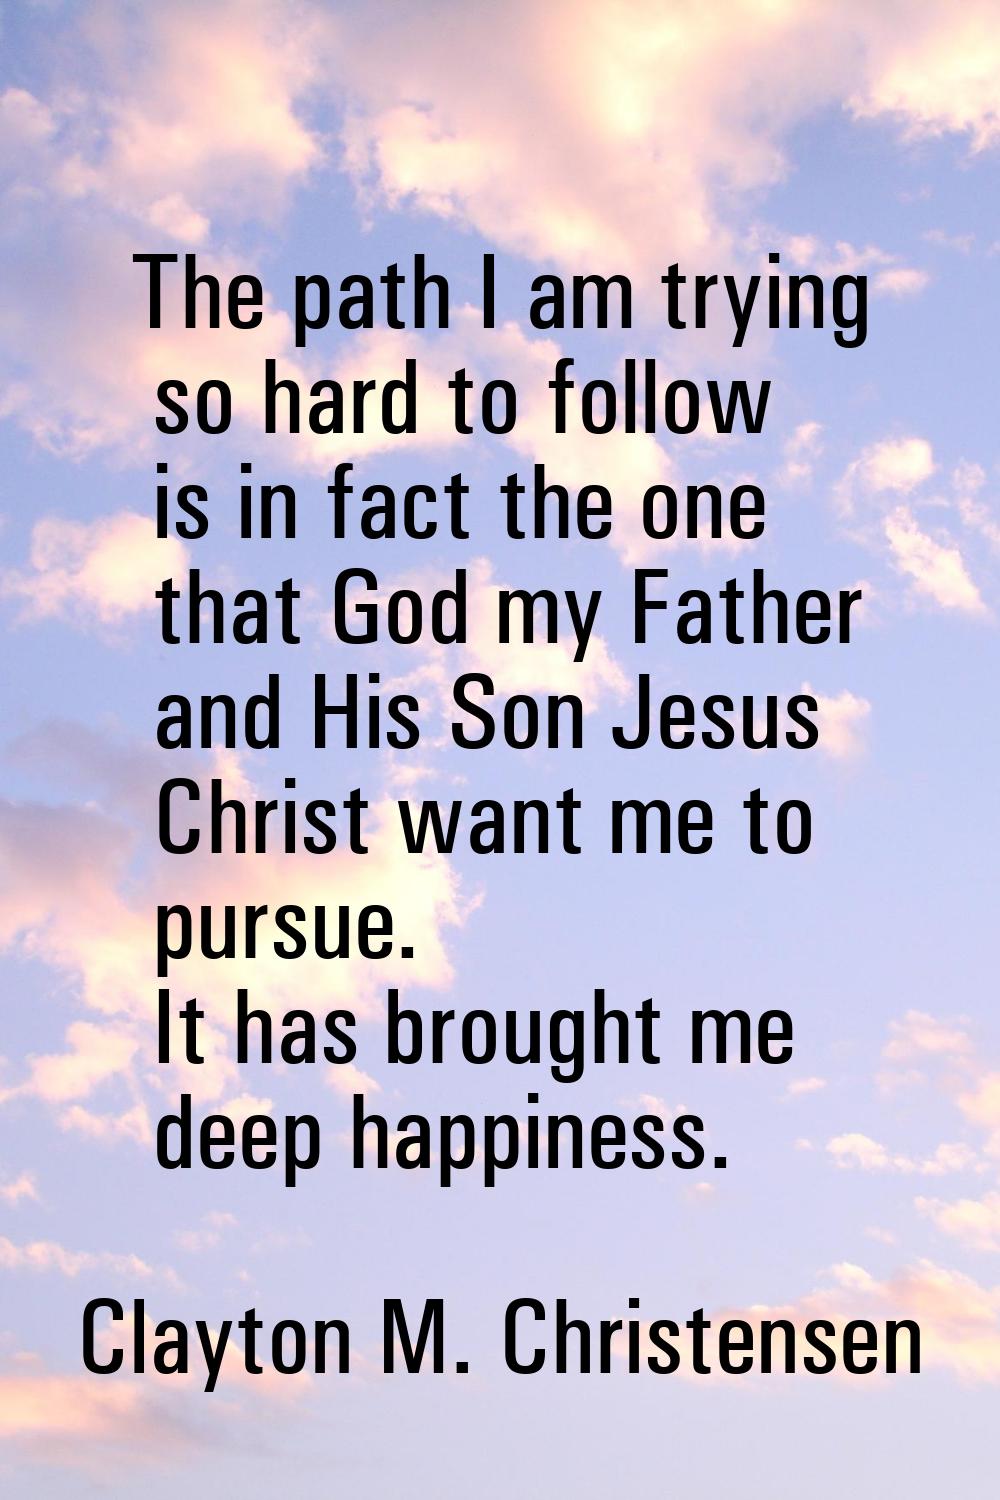 The path I am trying so hard to follow is in fact the one that God my Father and His Son Jesus Chri